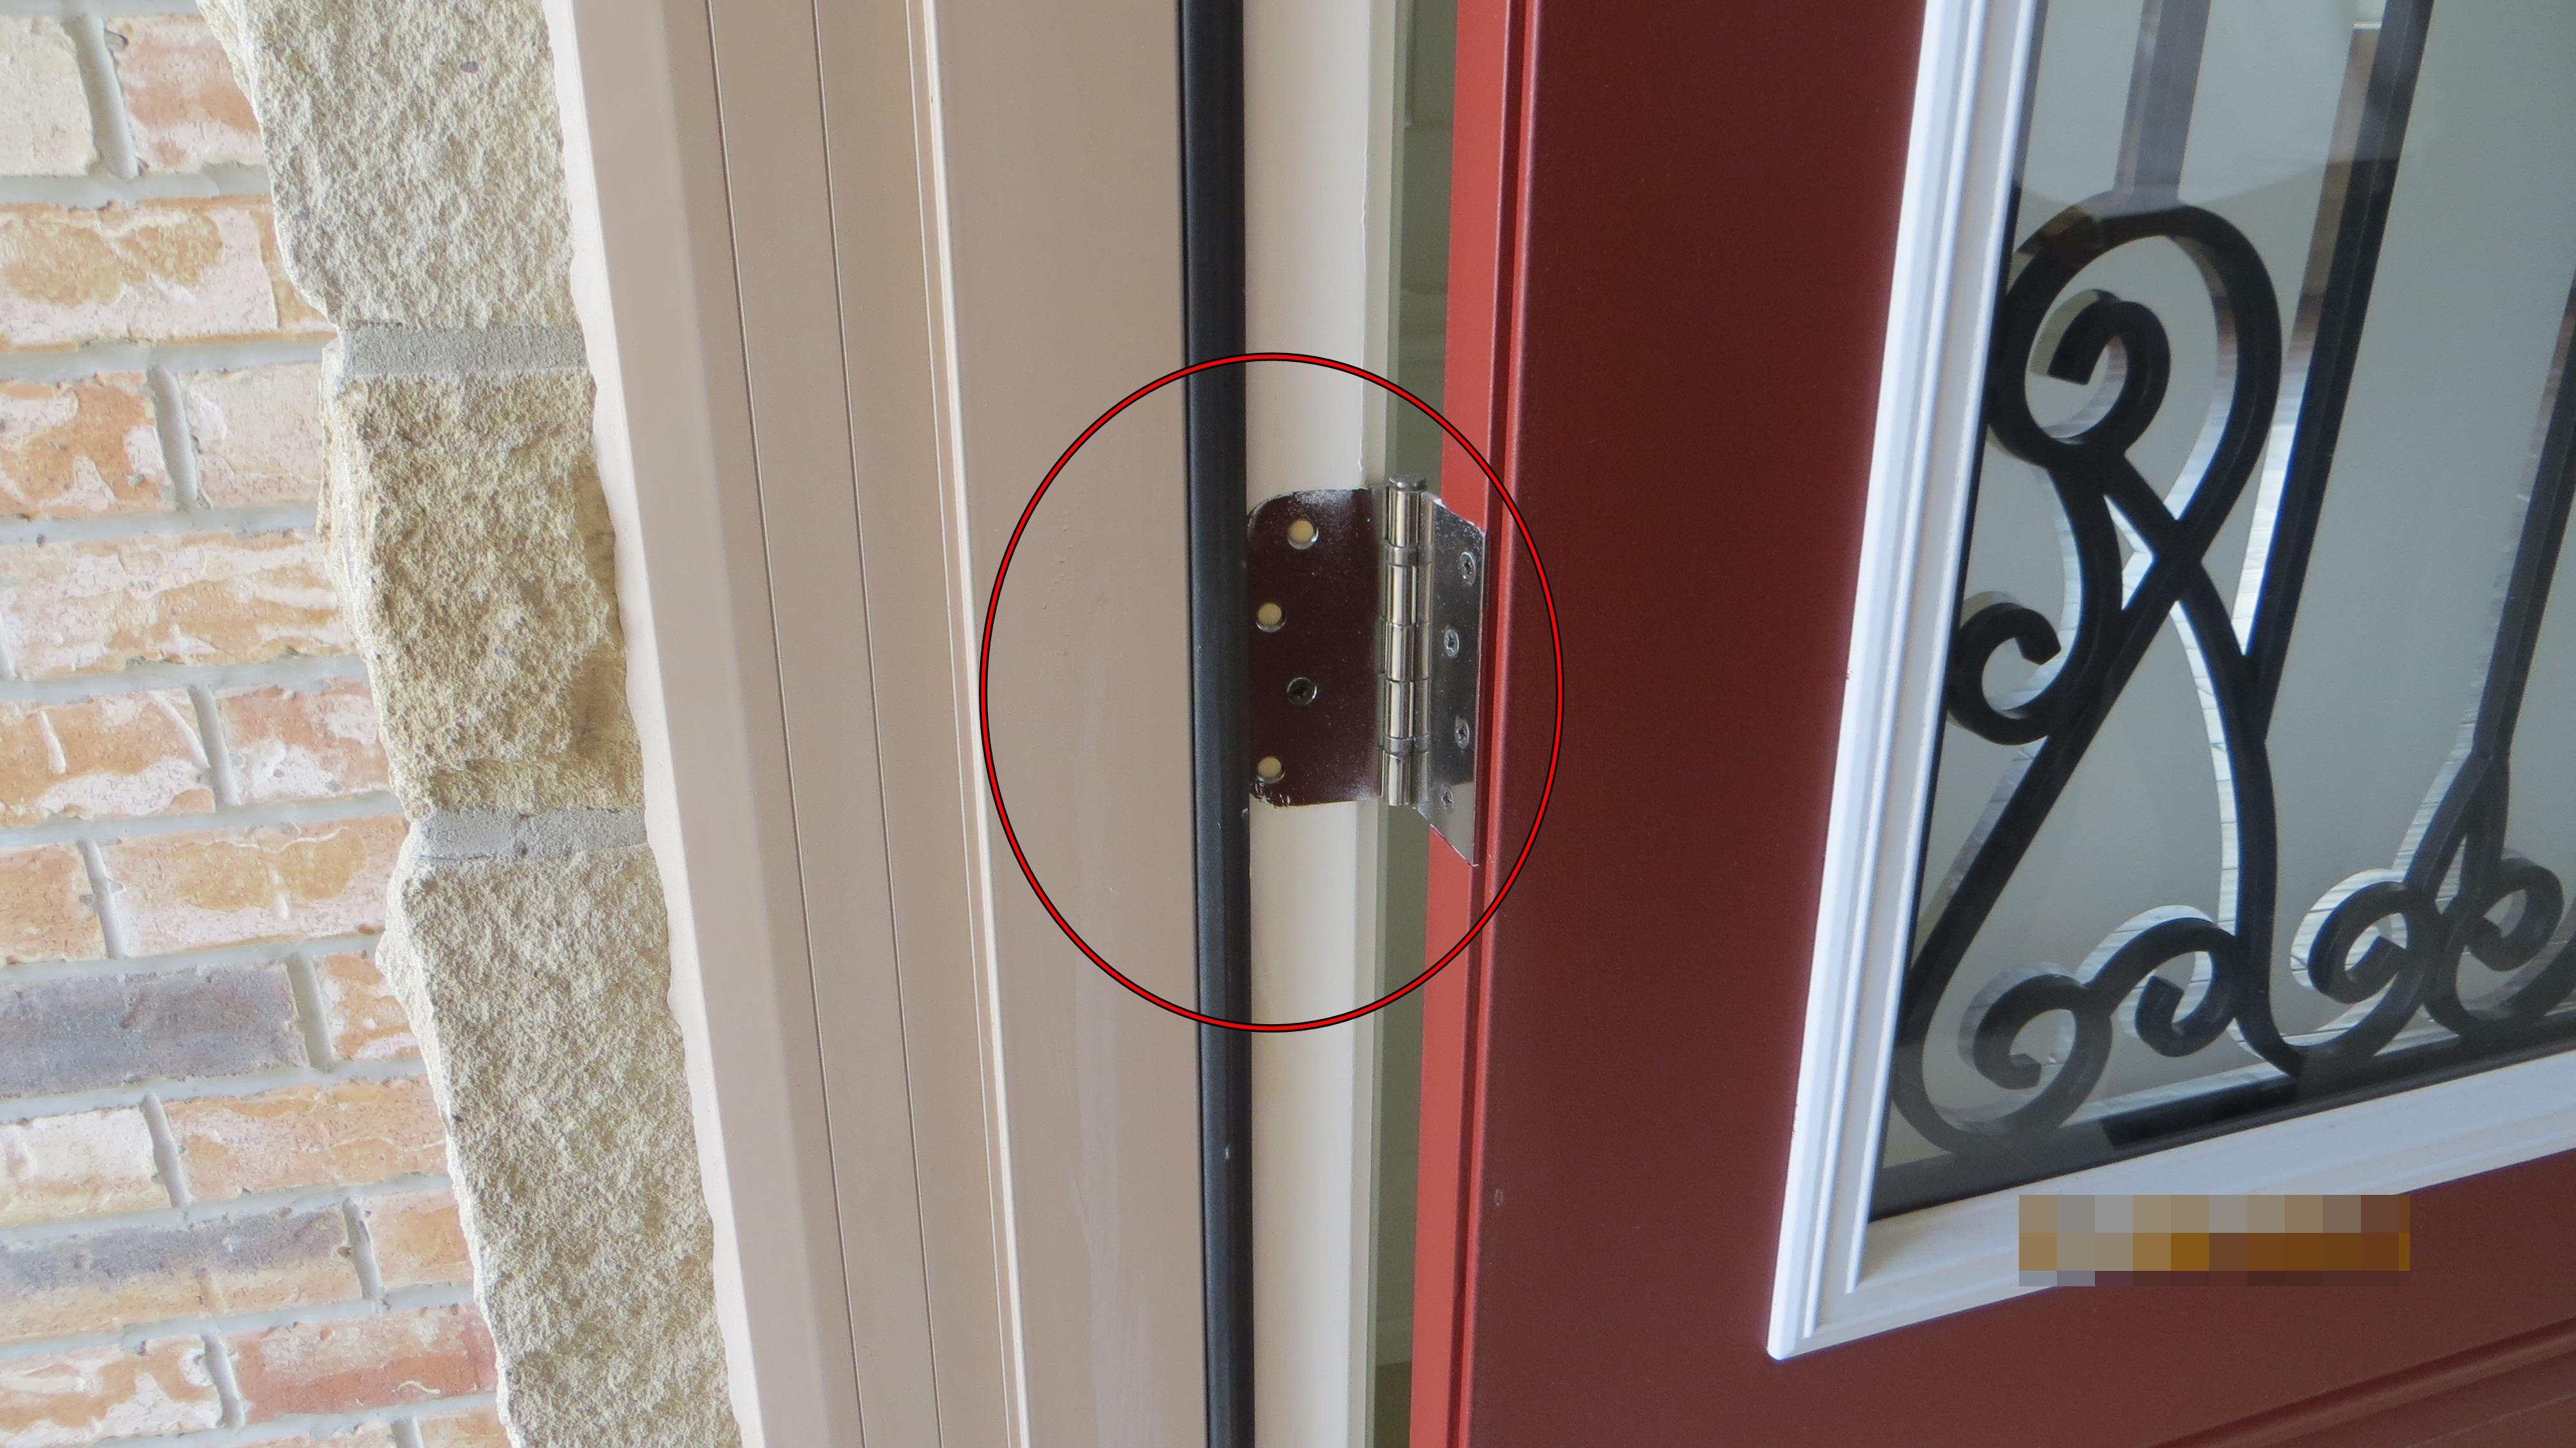 Only one screw for entrance door